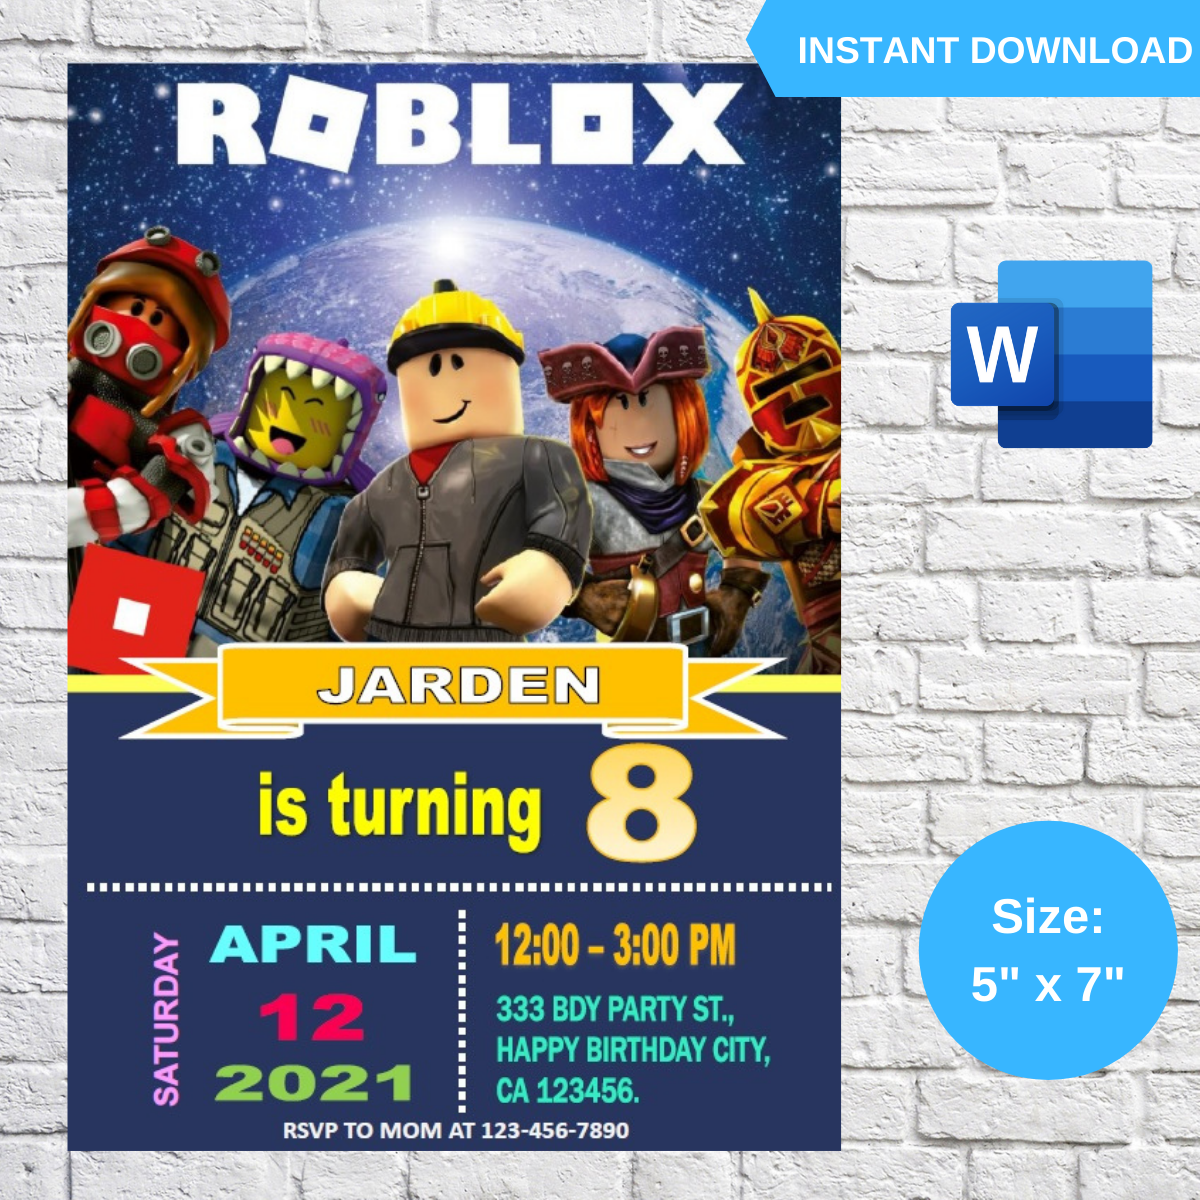 Roblox Game Birthday Party Invitation Template